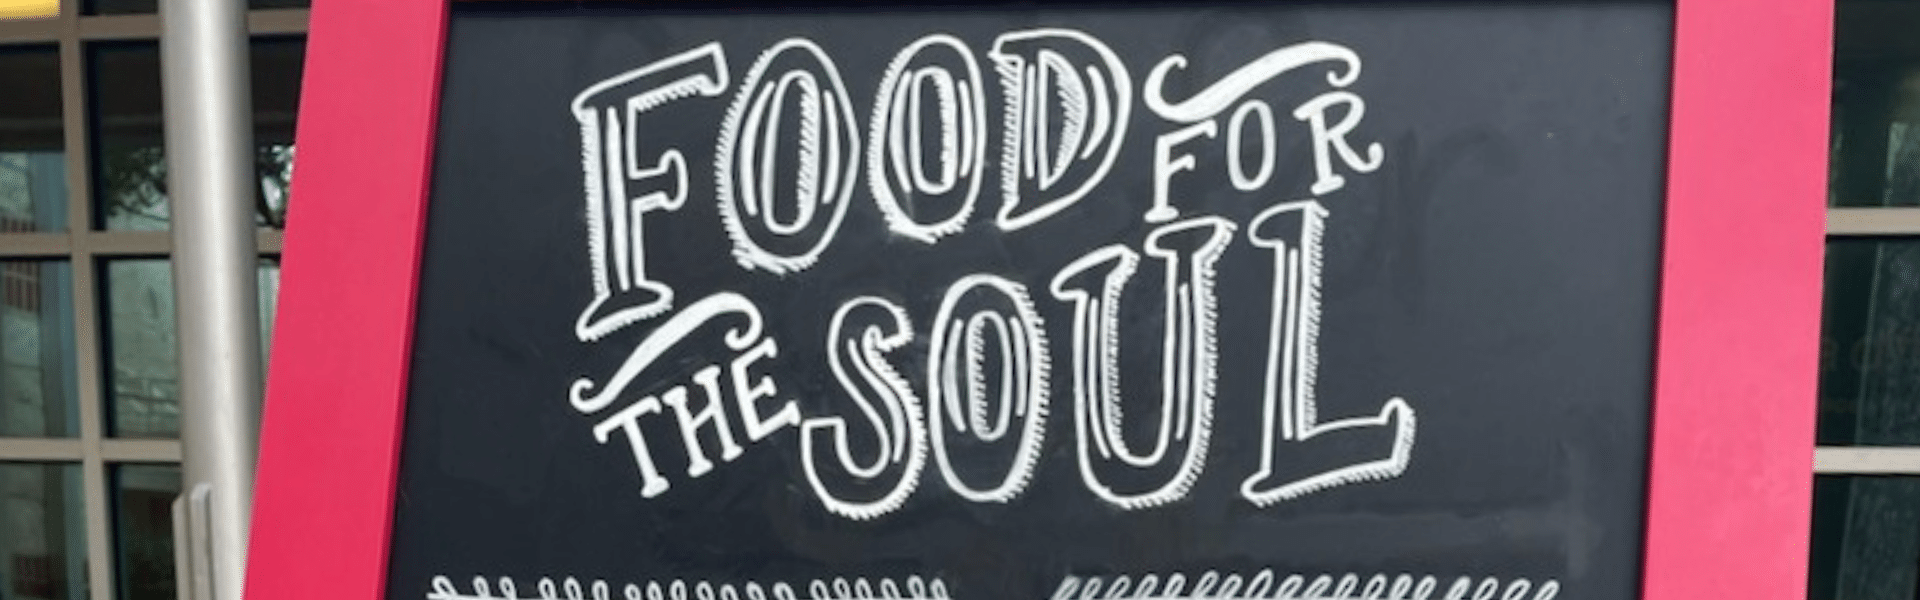 Event Calendar - Food for the Soul - July 2021